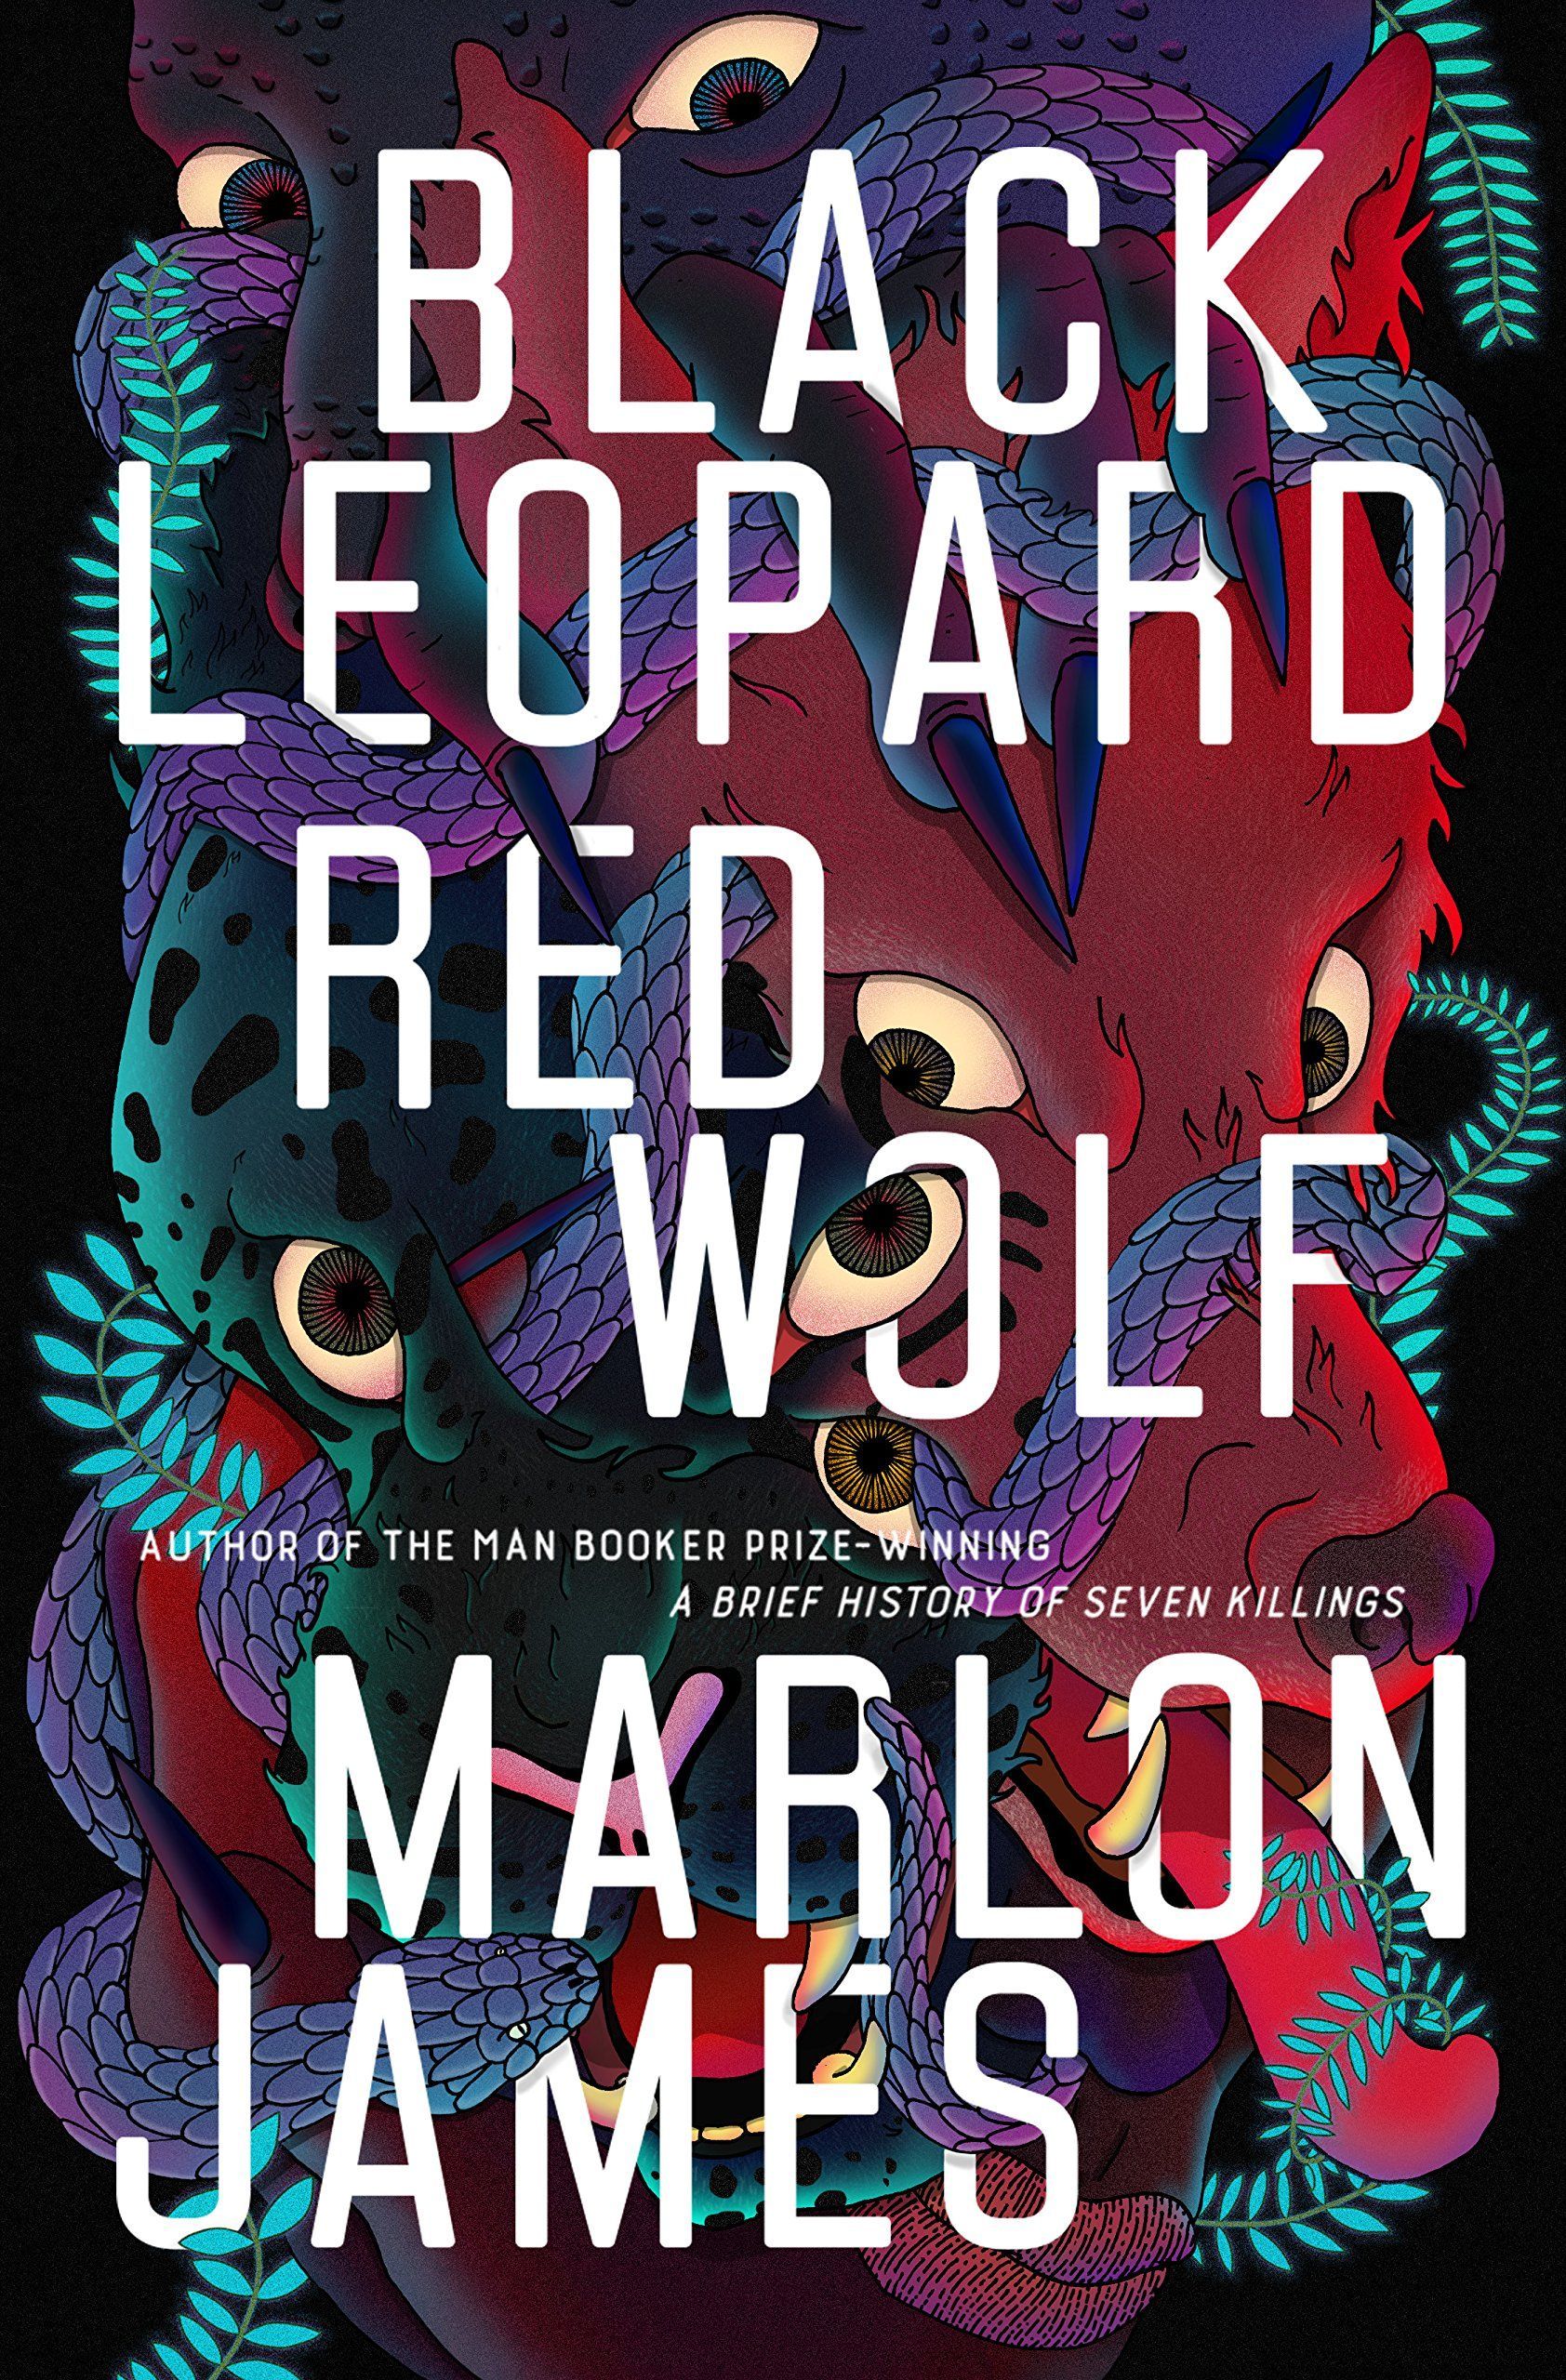 But That Is Not the Story: On Marlon James’s “Black Leopard, Red Wolf”